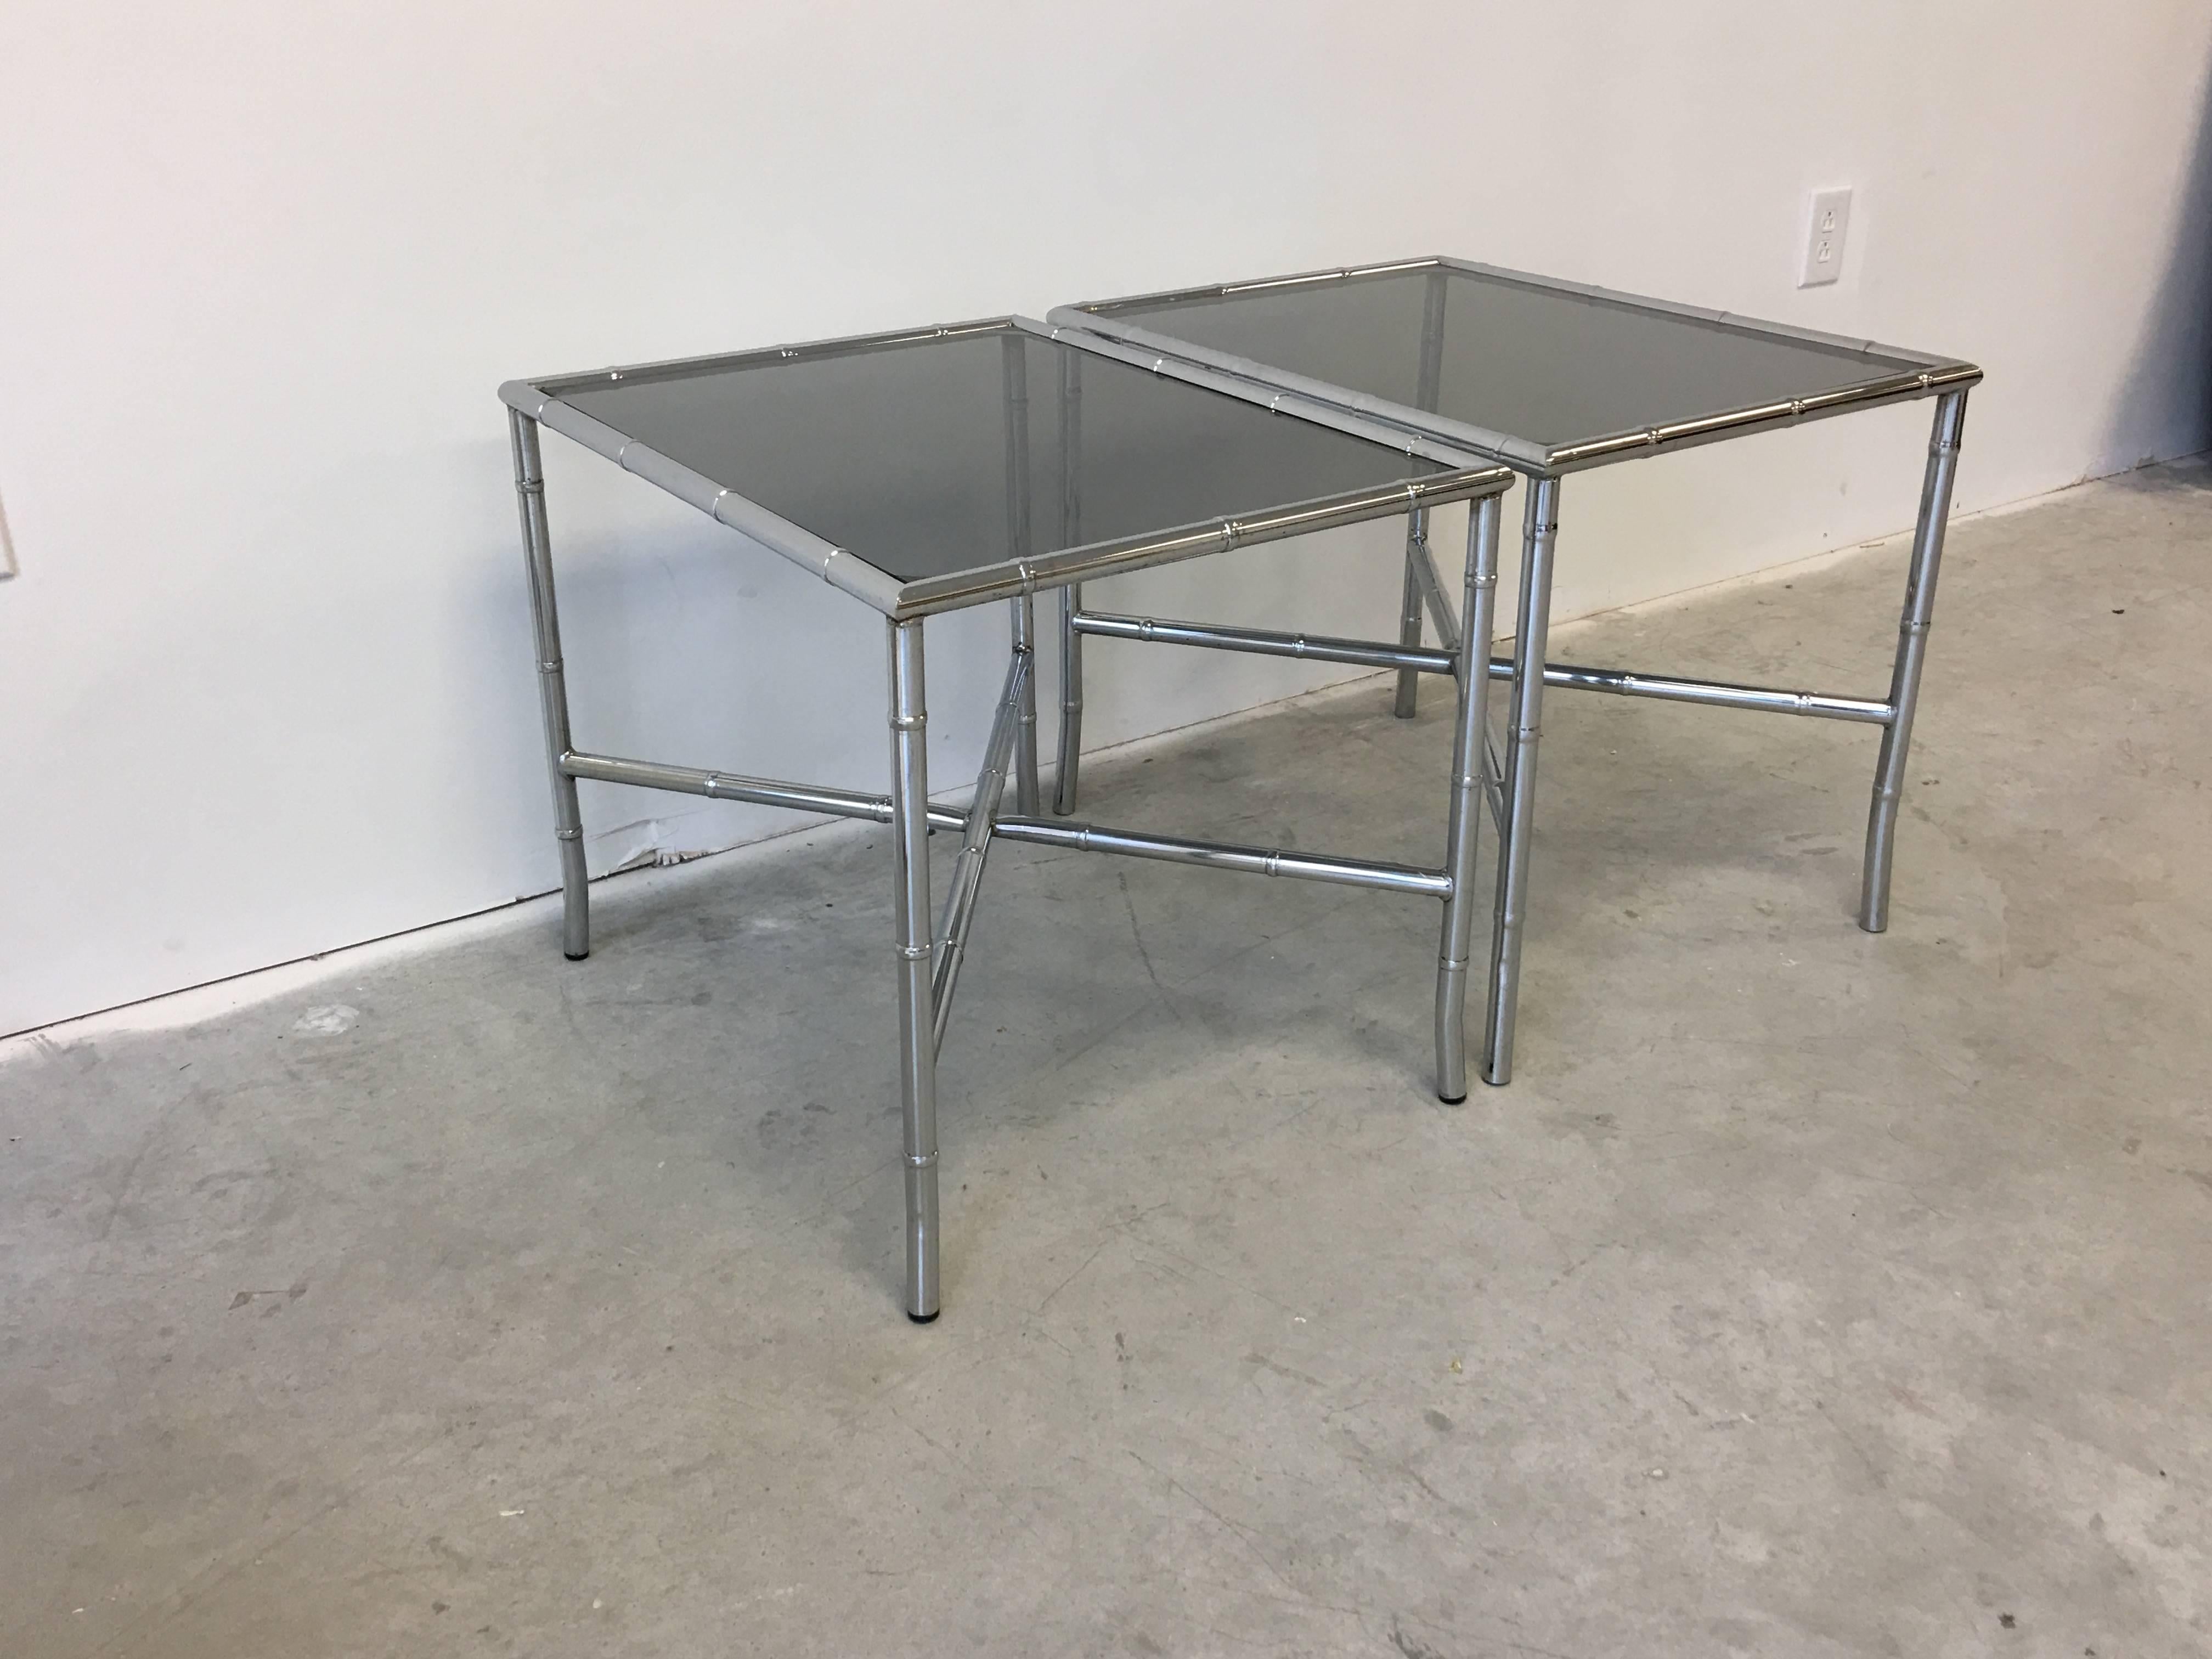 Offered is a beautiful, pair of 1970s chrome faux bamboo side tables with smoked glass tops.